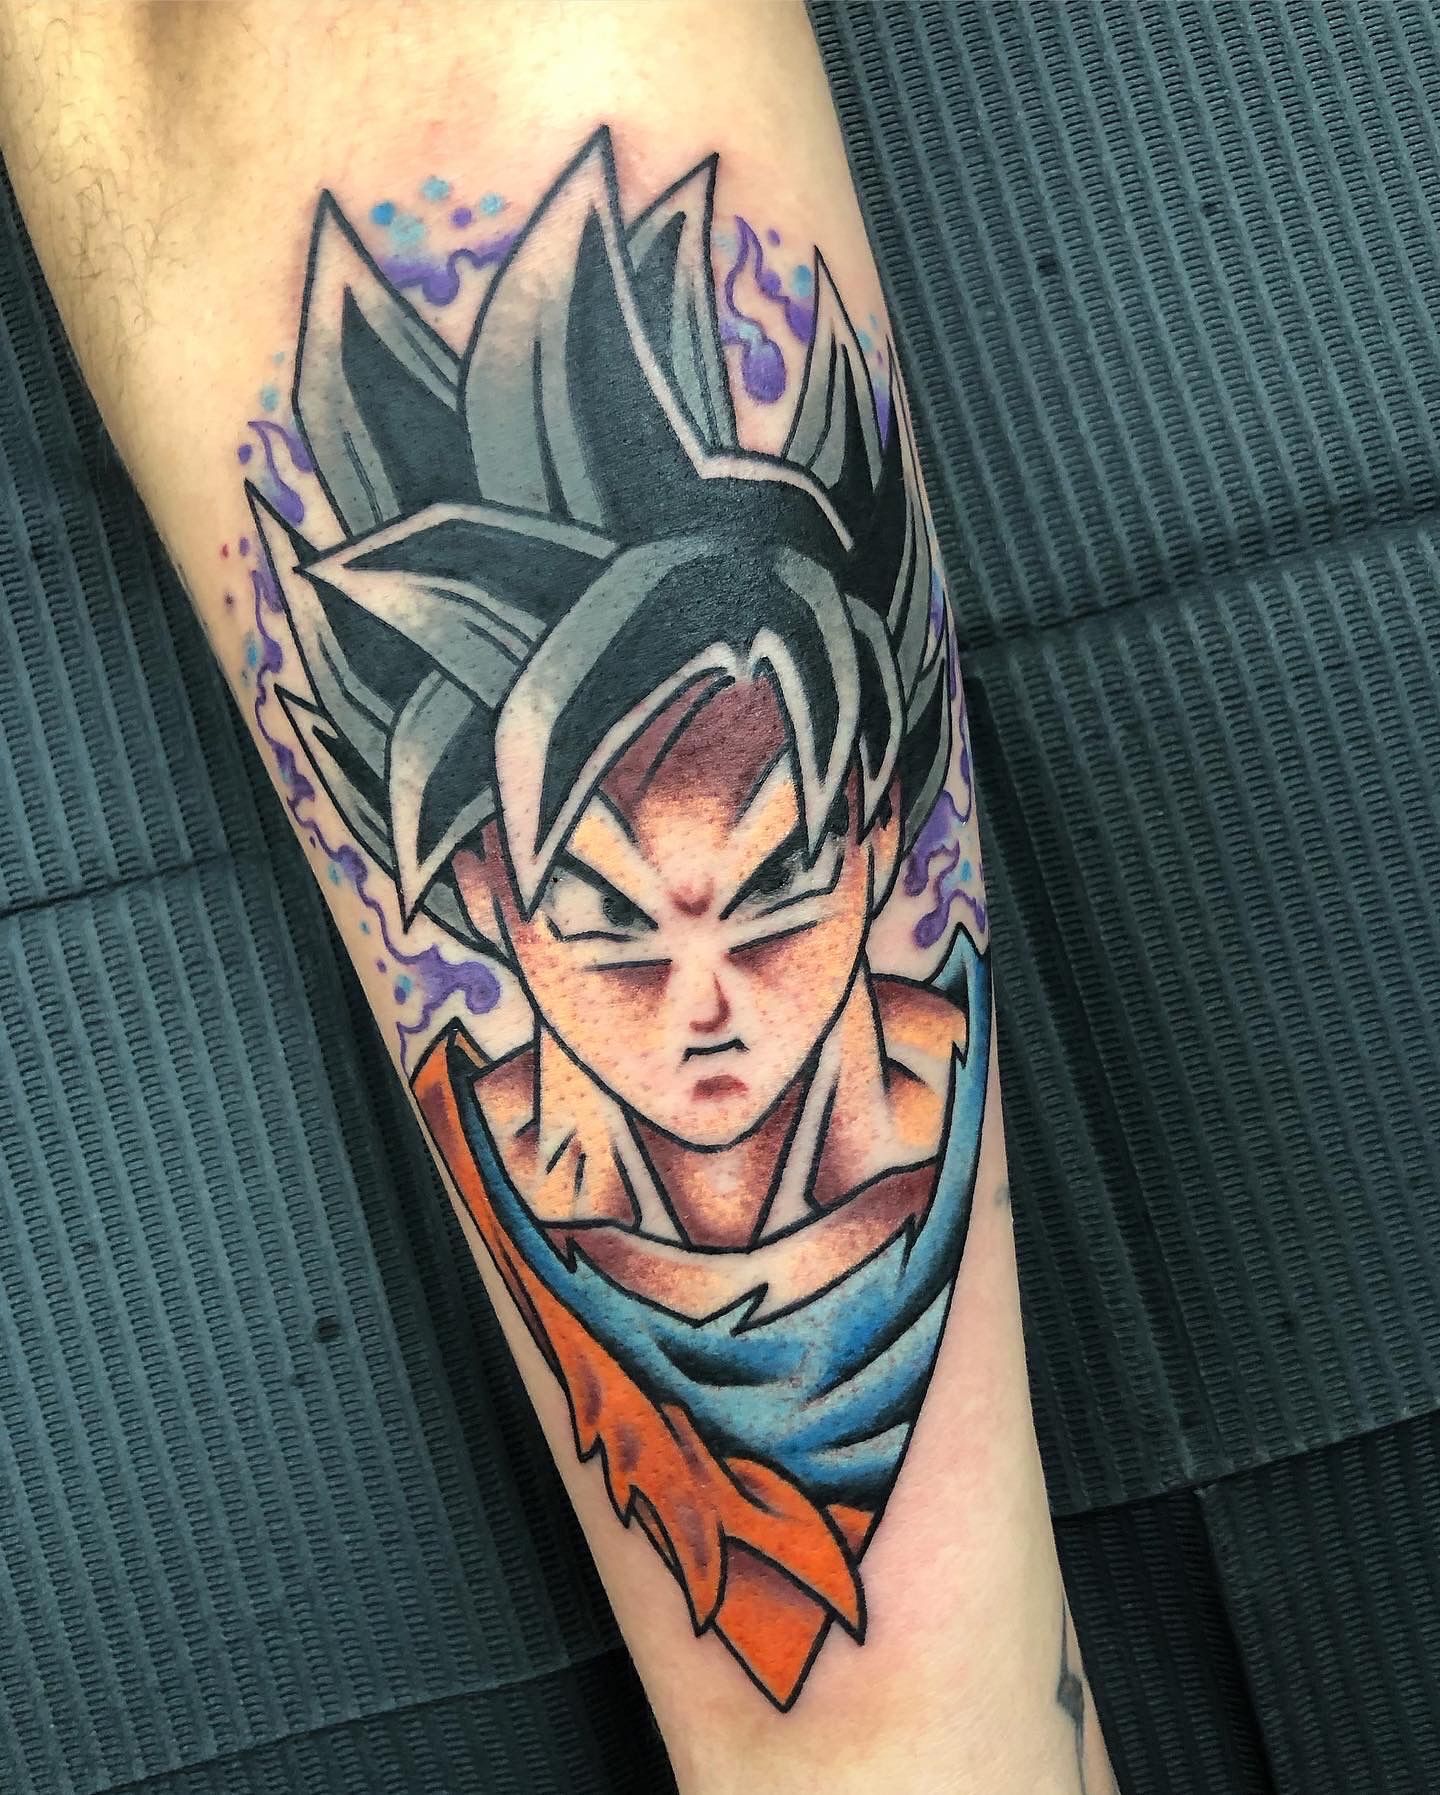 Tattoo uploaded by Brennantattoo • One from today dragon ball z